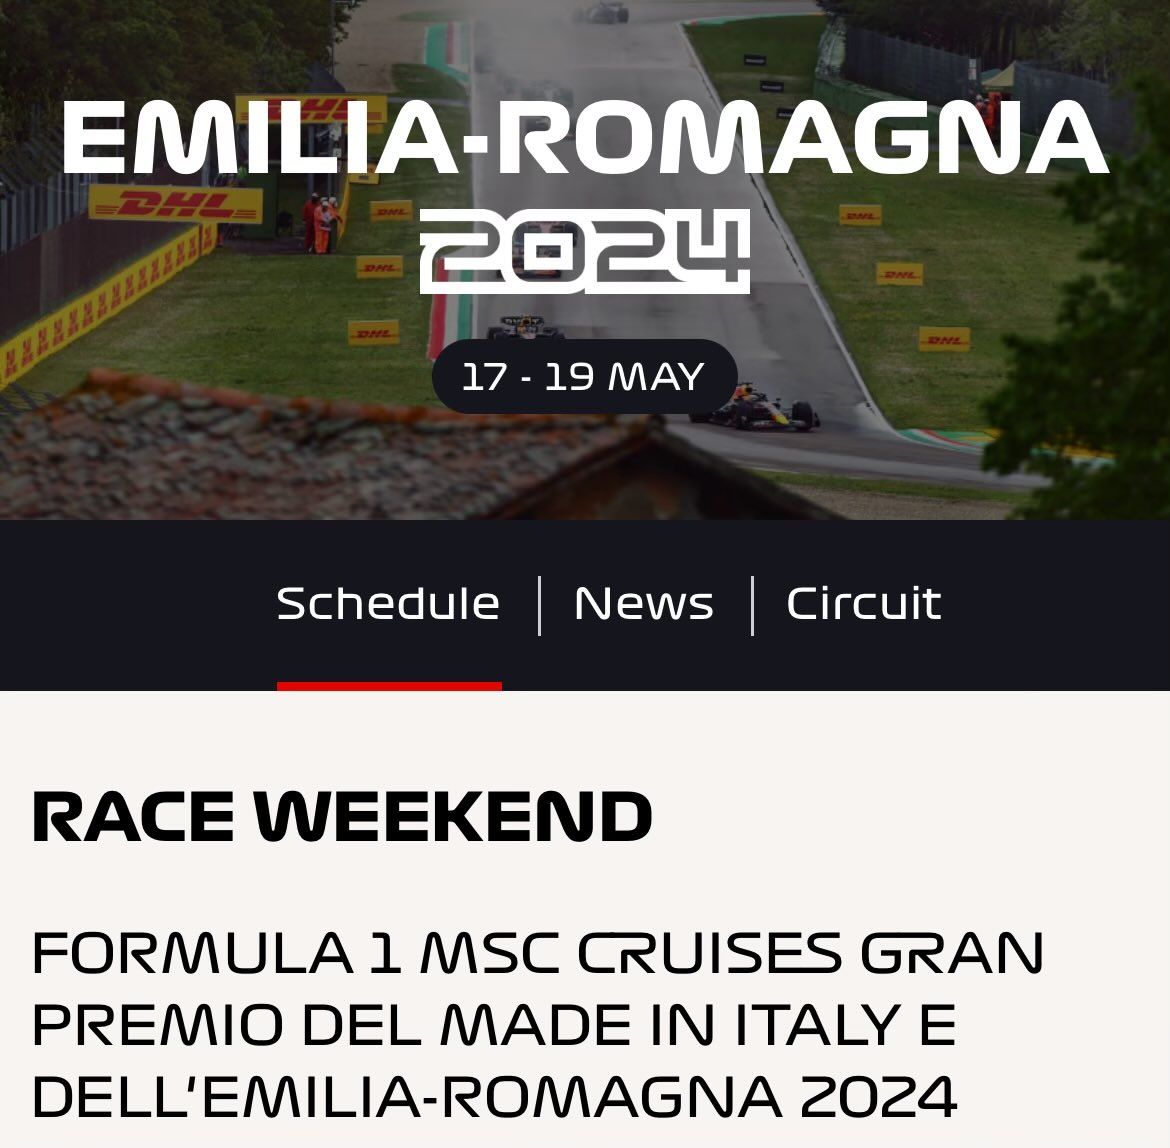 Tomorrow’s GP is so unserious with its naming, I guess they thought we’d forget it’s in Italy.